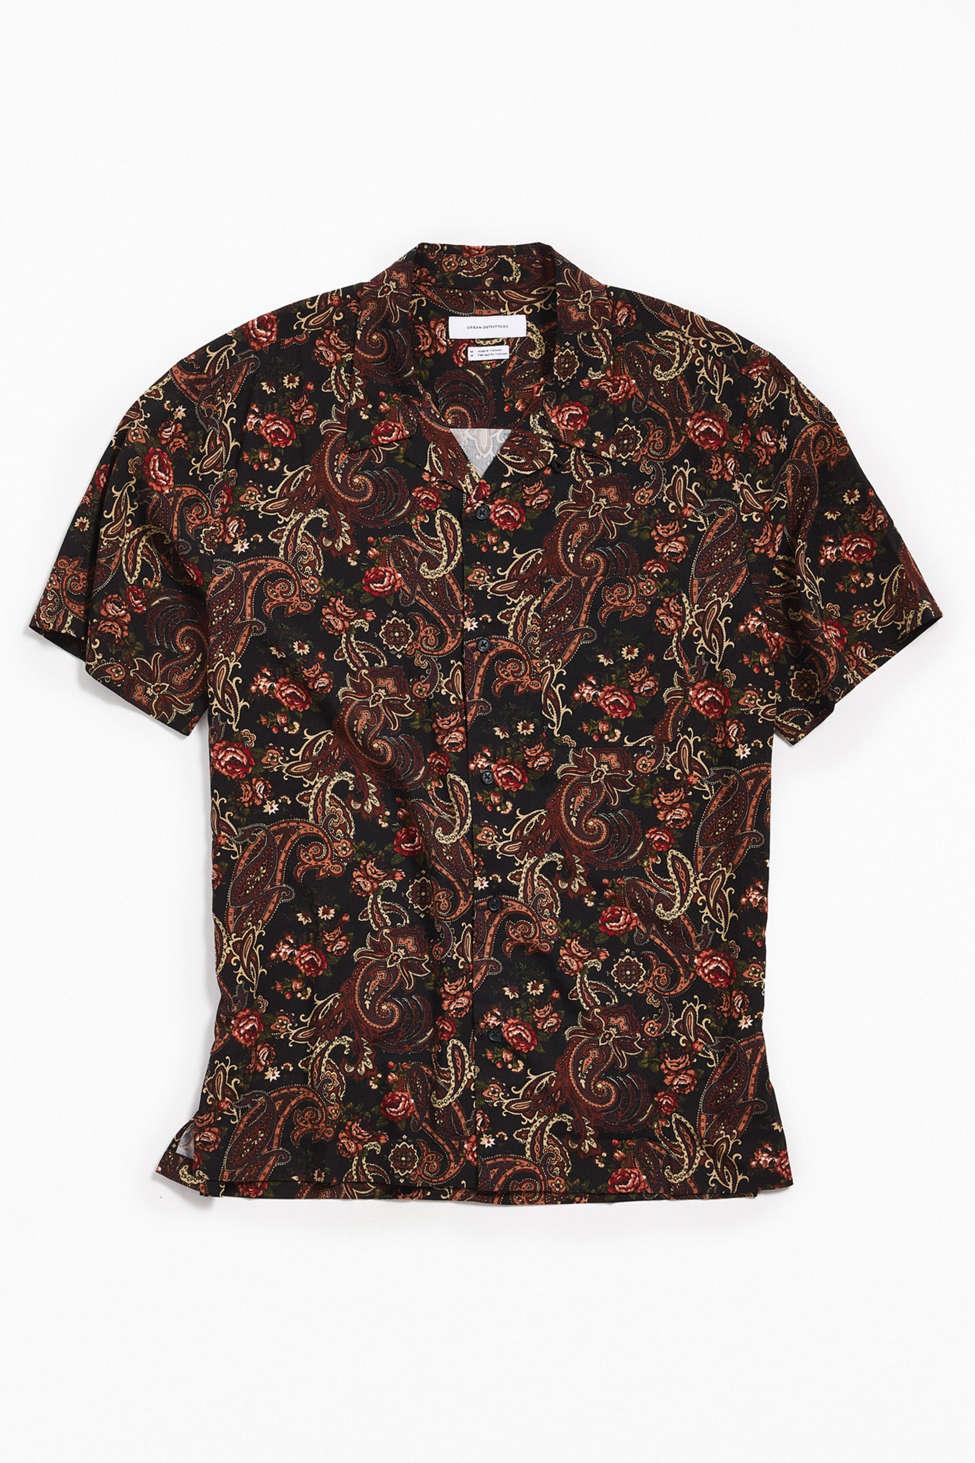 Urban Outfitters Uo Ornate Paisley Rayon Short Sleeve Button-down Shirt for  Men